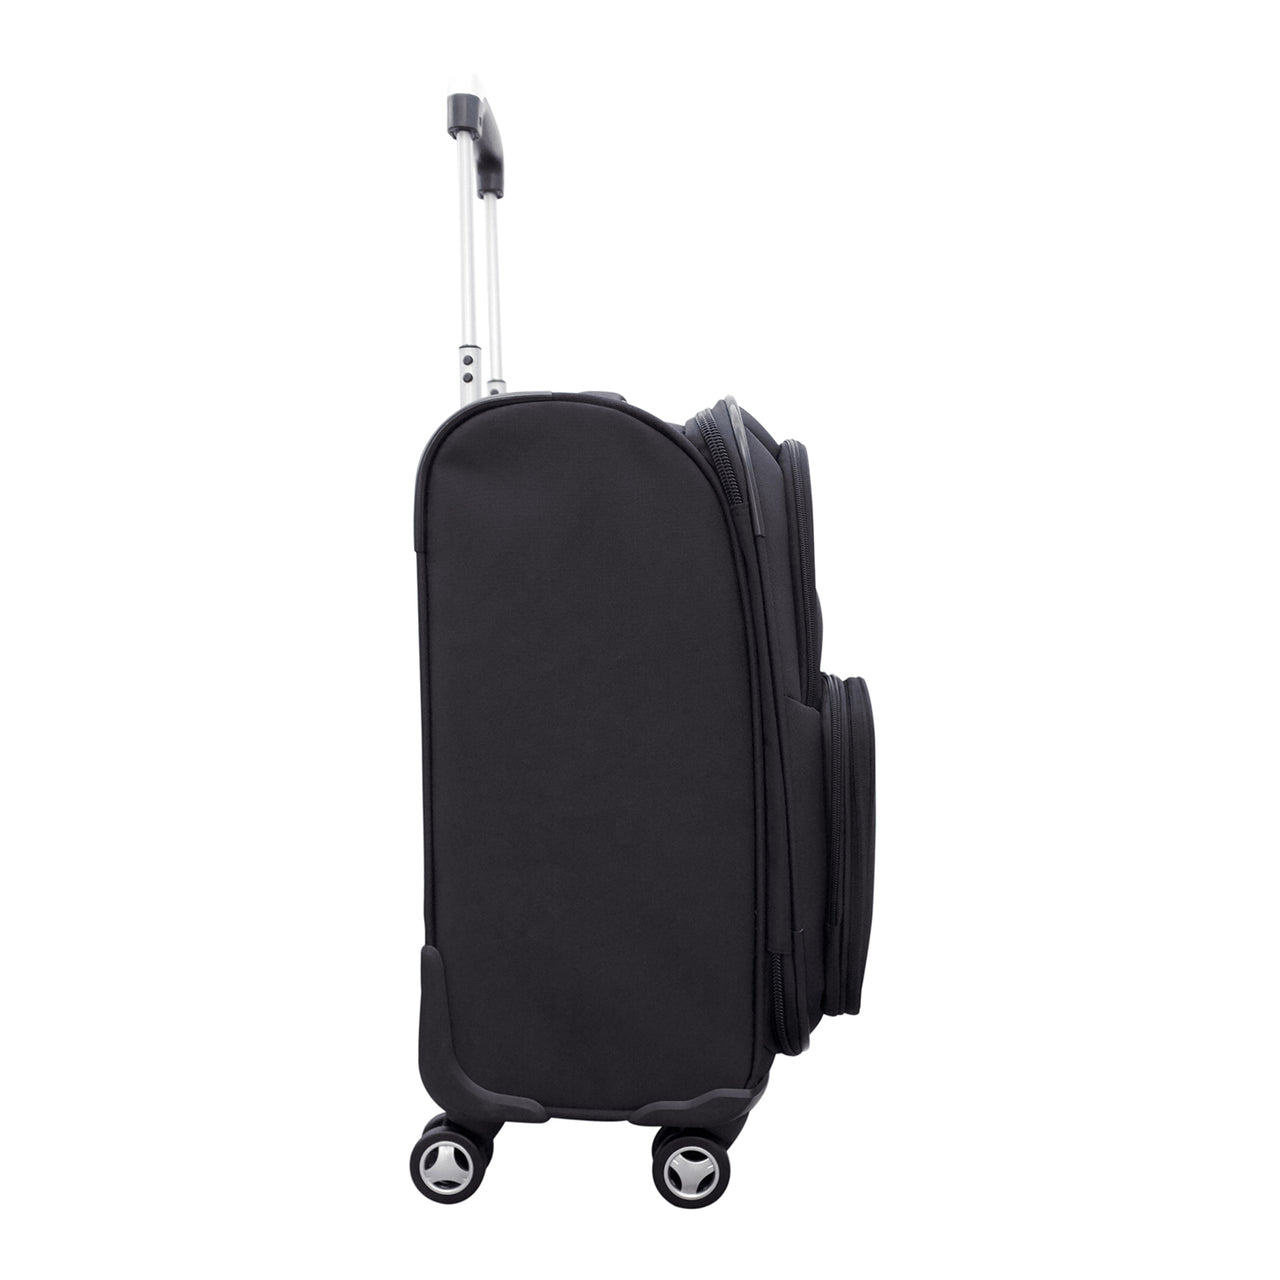 Sabres Luggage | Buffalo Sabres 20" Carry-on Spinner Luggage